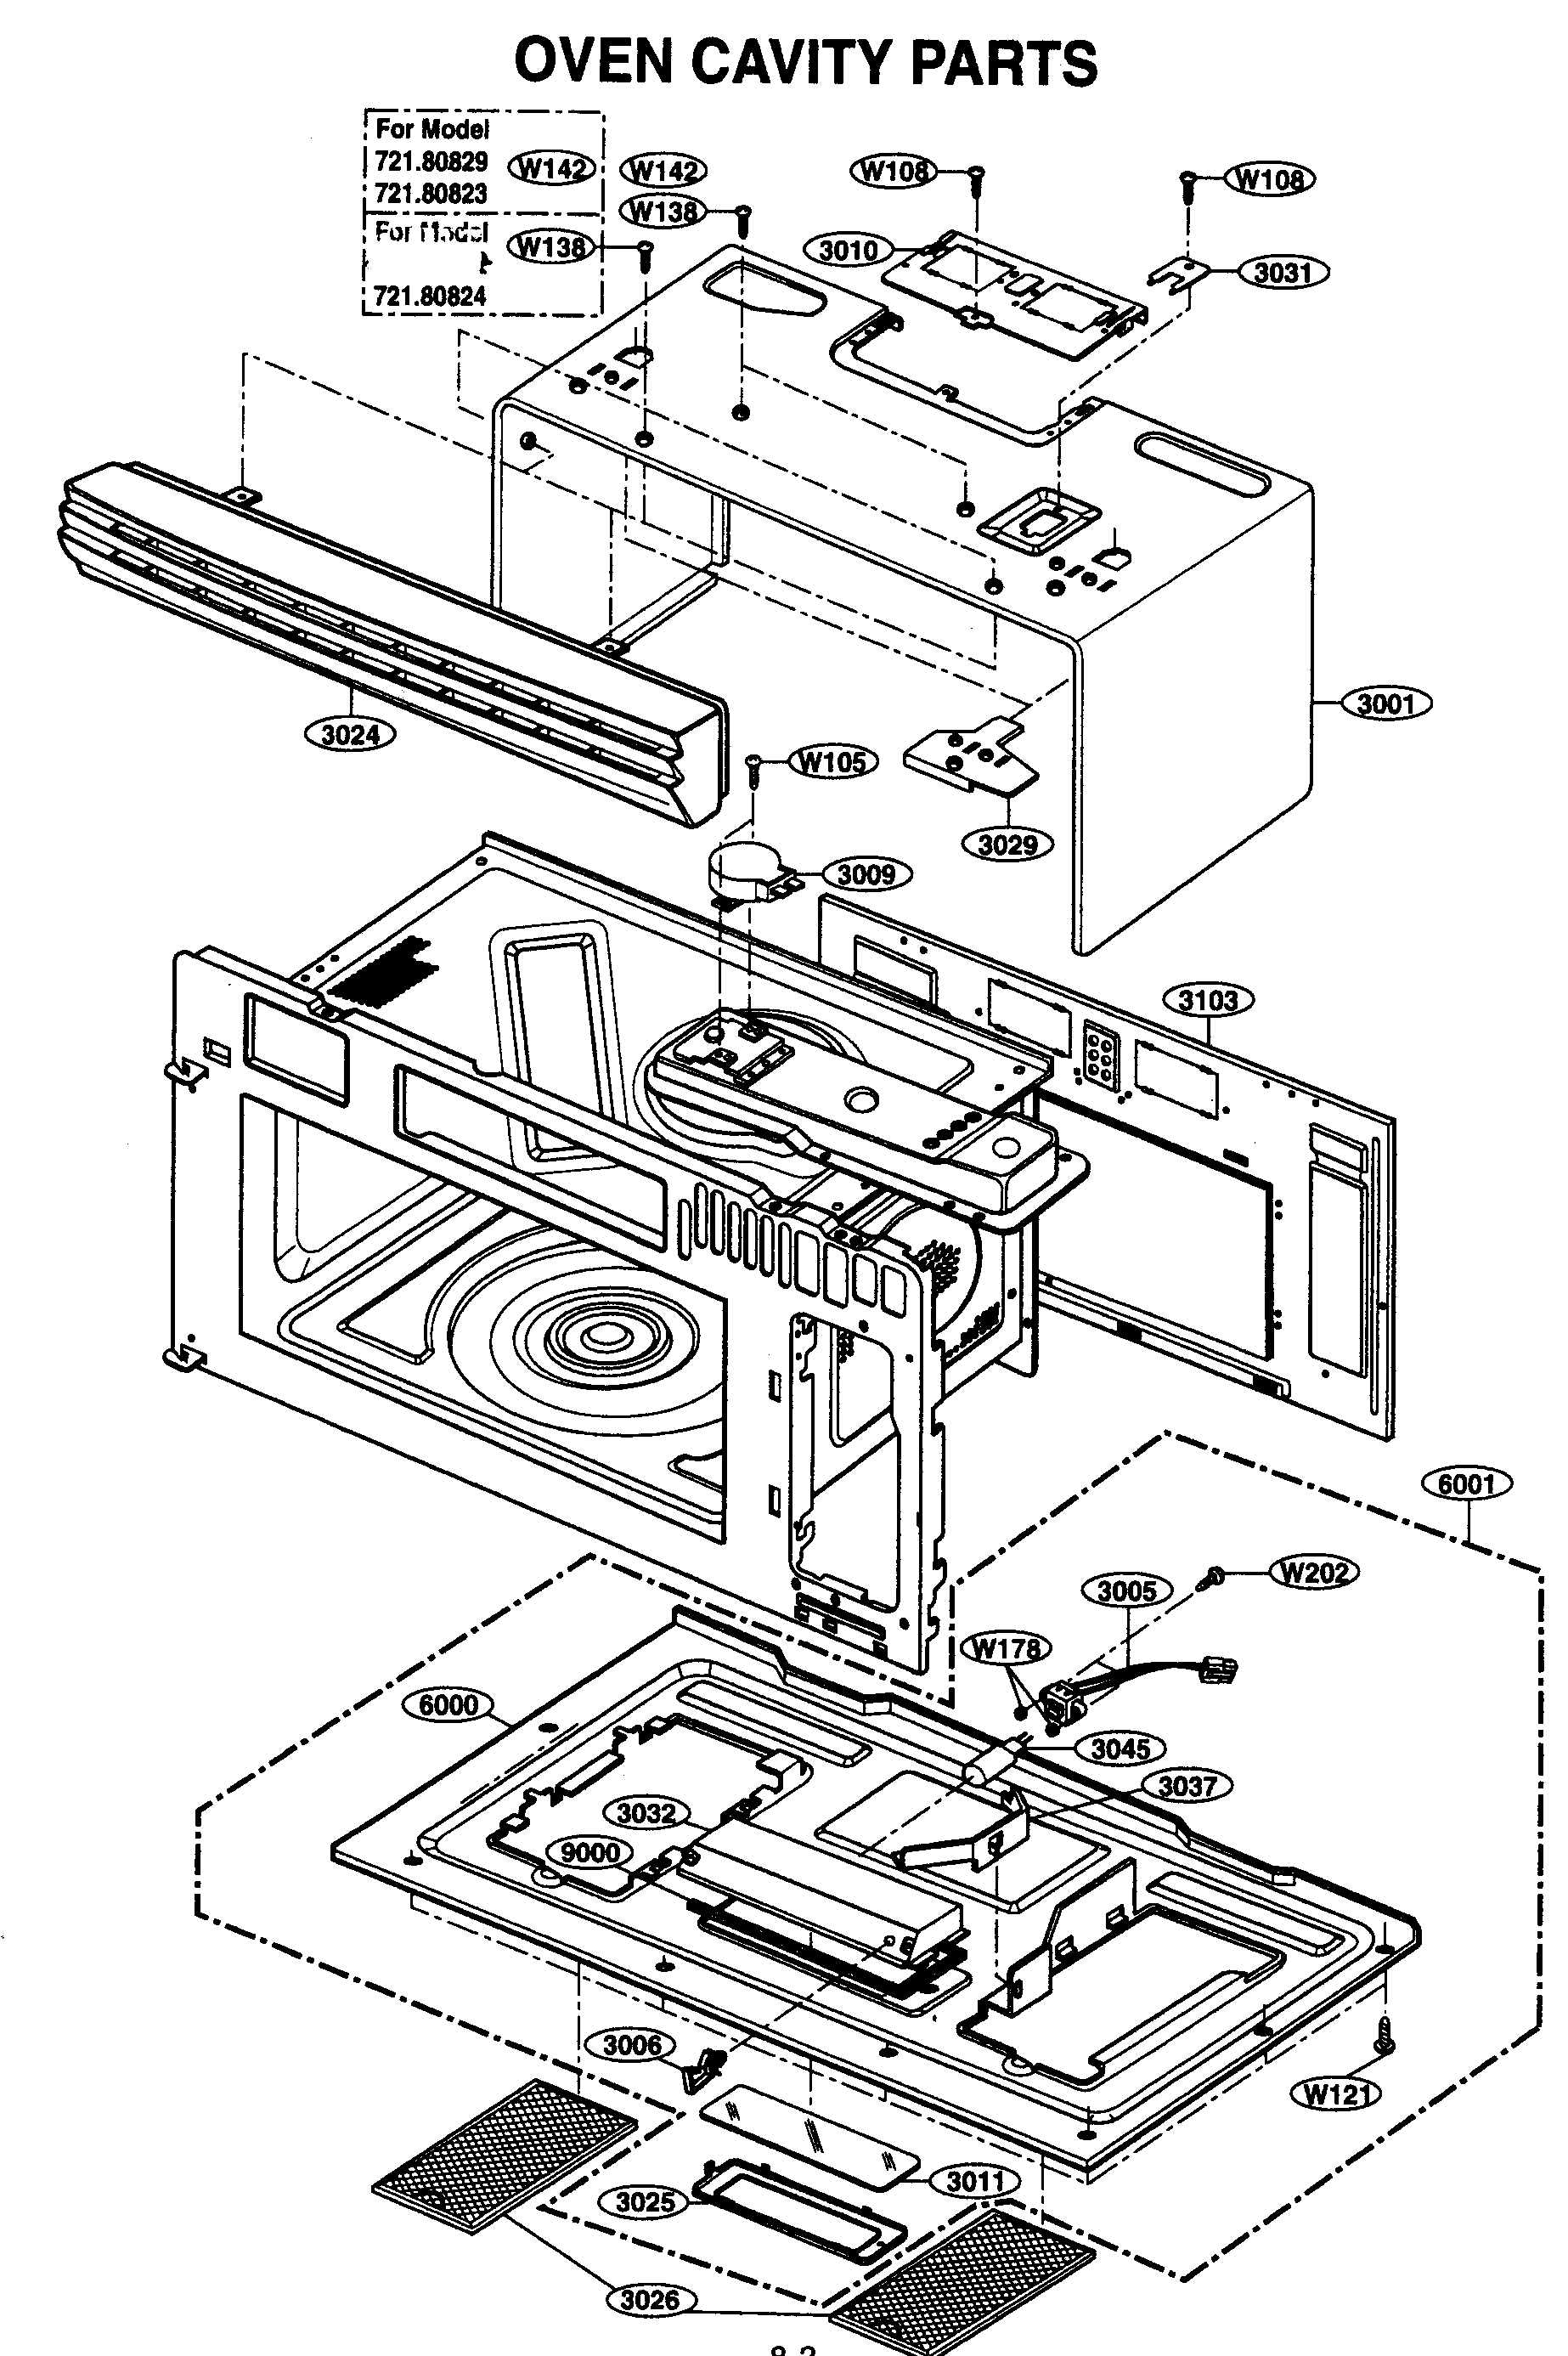 OVEN CAVITY PARTS Diagram & Parts List for Model 72180823500 Kenmore